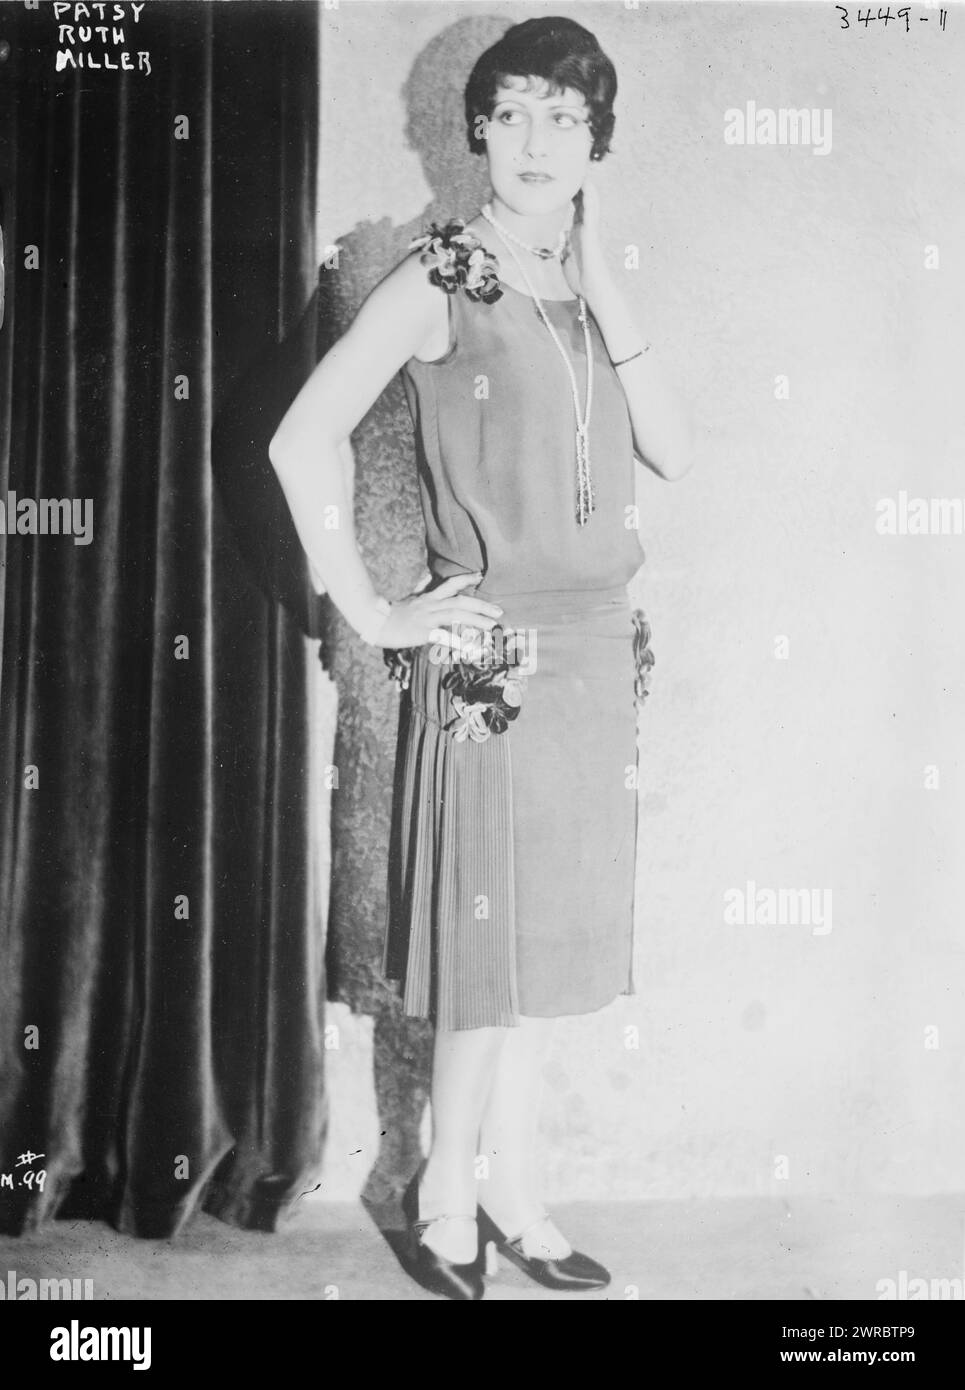 Patsy Ruth Miller, Photograph shows American film actress Patsy Ruth Miller (1904-1995)., ca. 1920 - ca. 1930, Glass negatives, 1 negative: glass Stock Photo